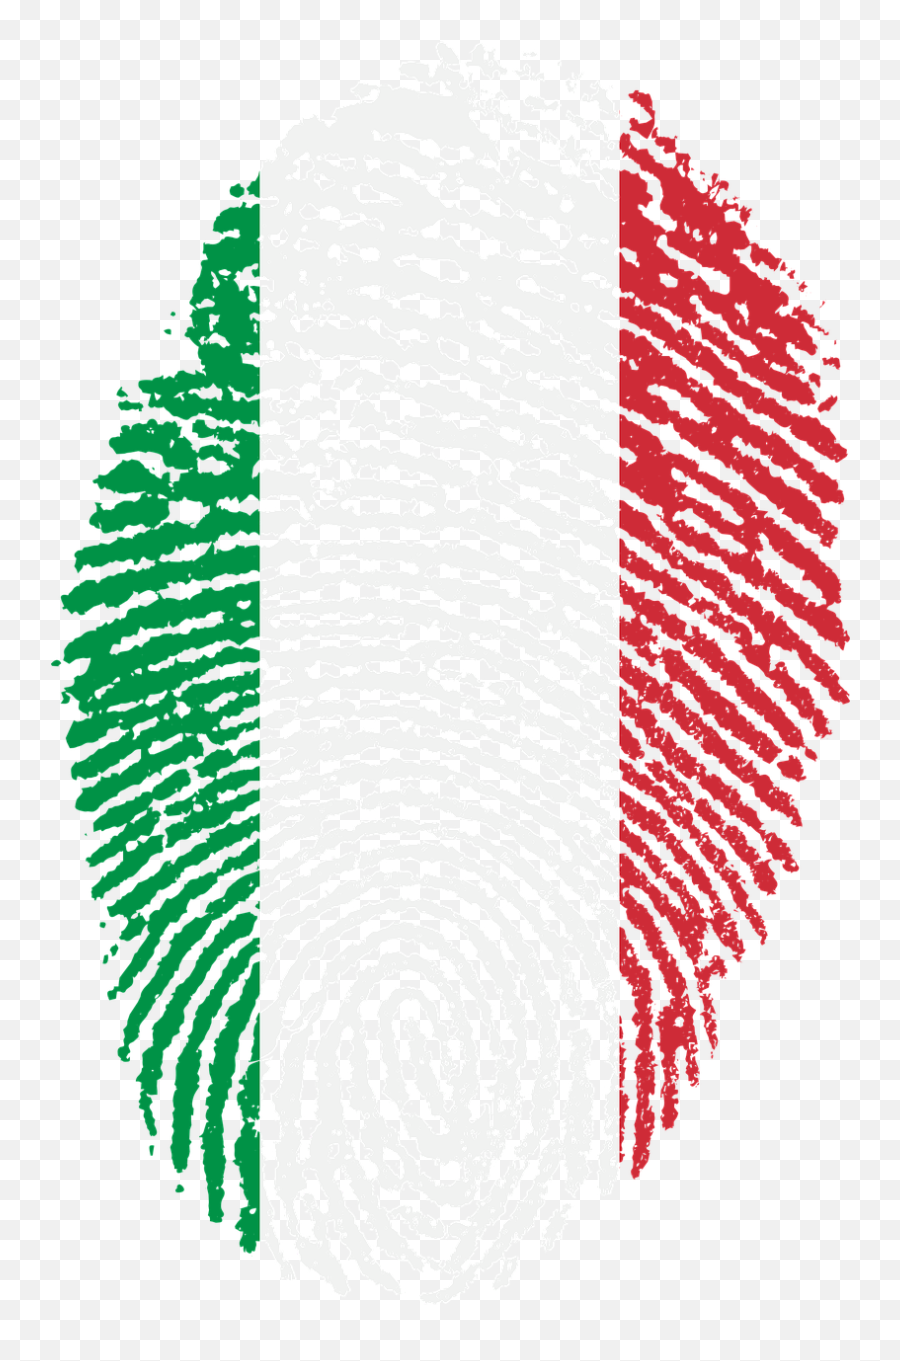 Automatic Acquisition Of The Italian Citizenship - Bandera Del Peru Png,Italy Png